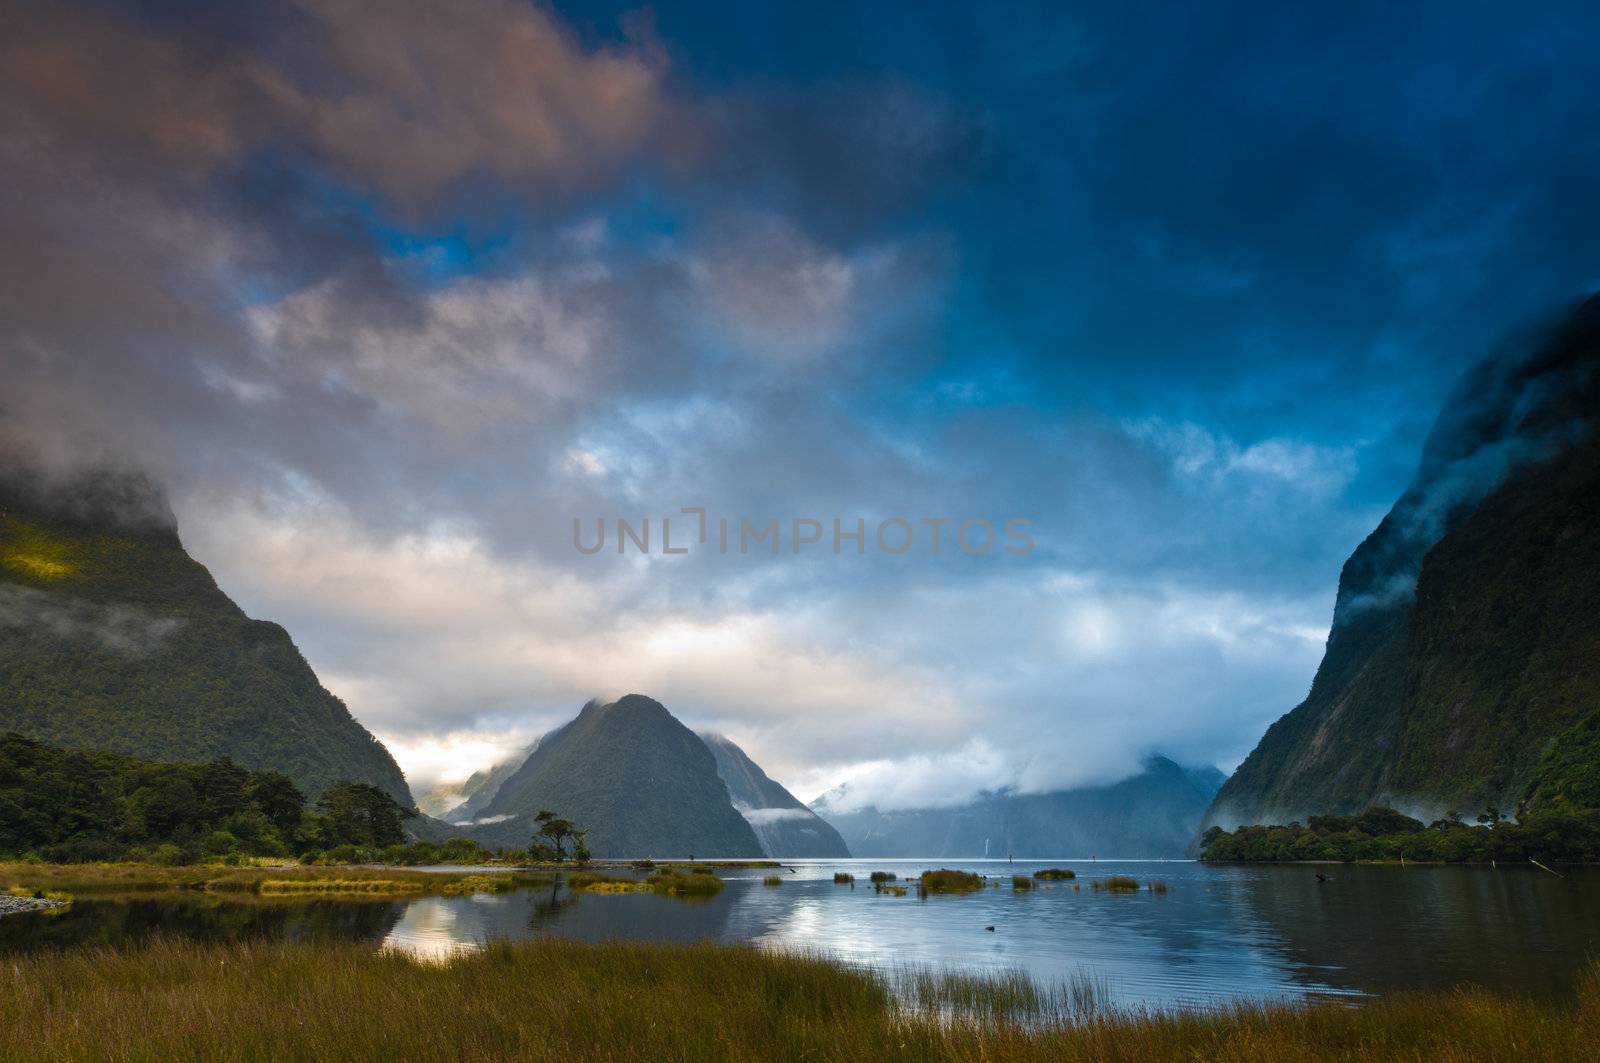 Cloudy morning at milford sound with sunrise in the back ground